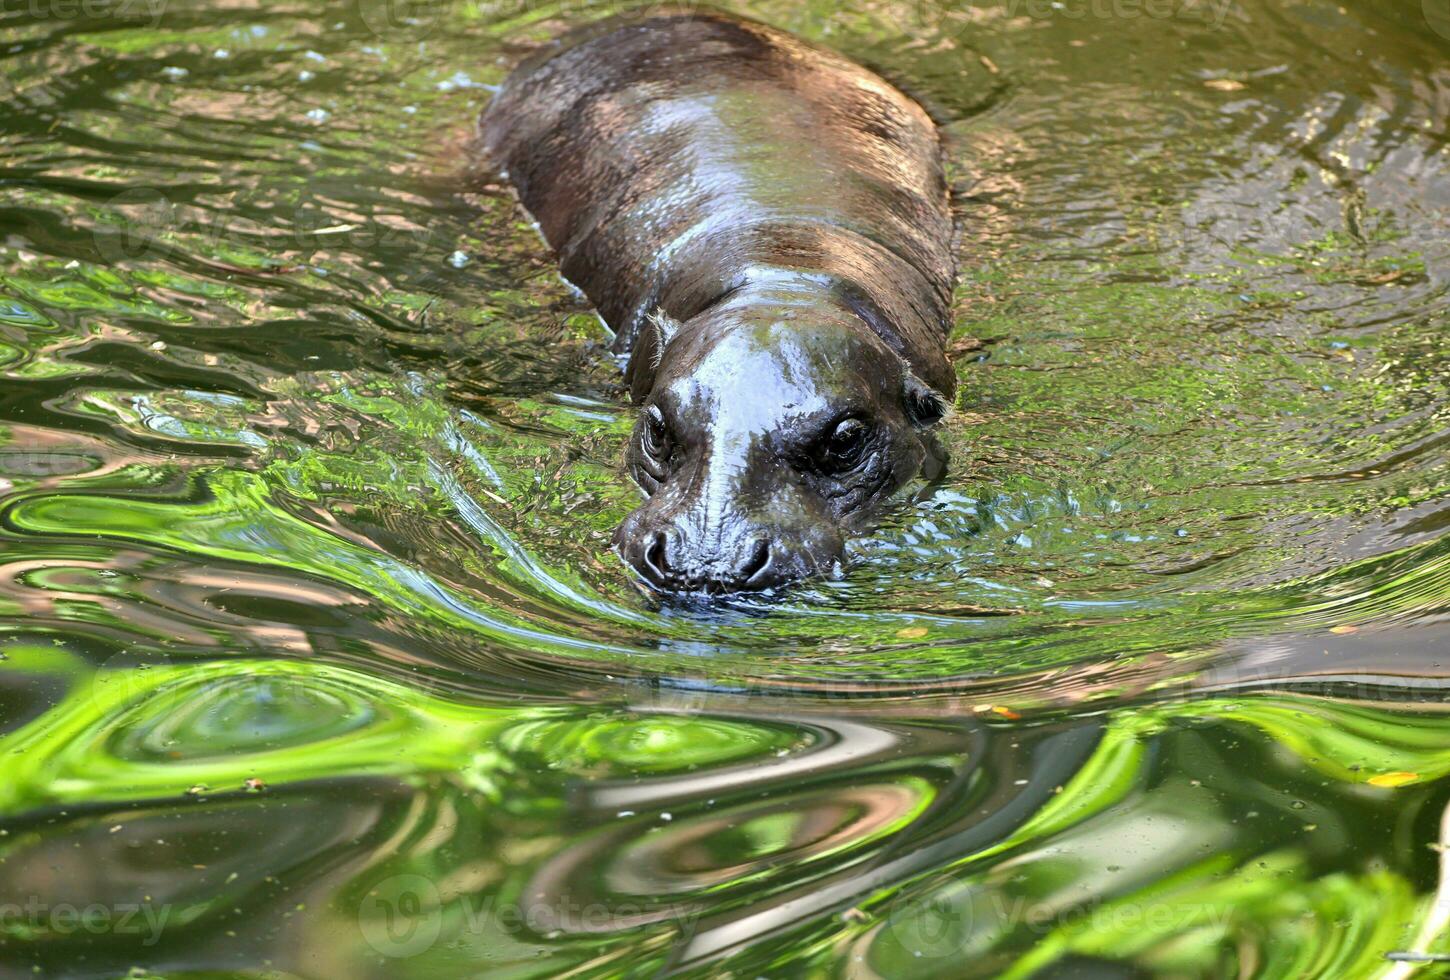 pygmy hippo in the water photo